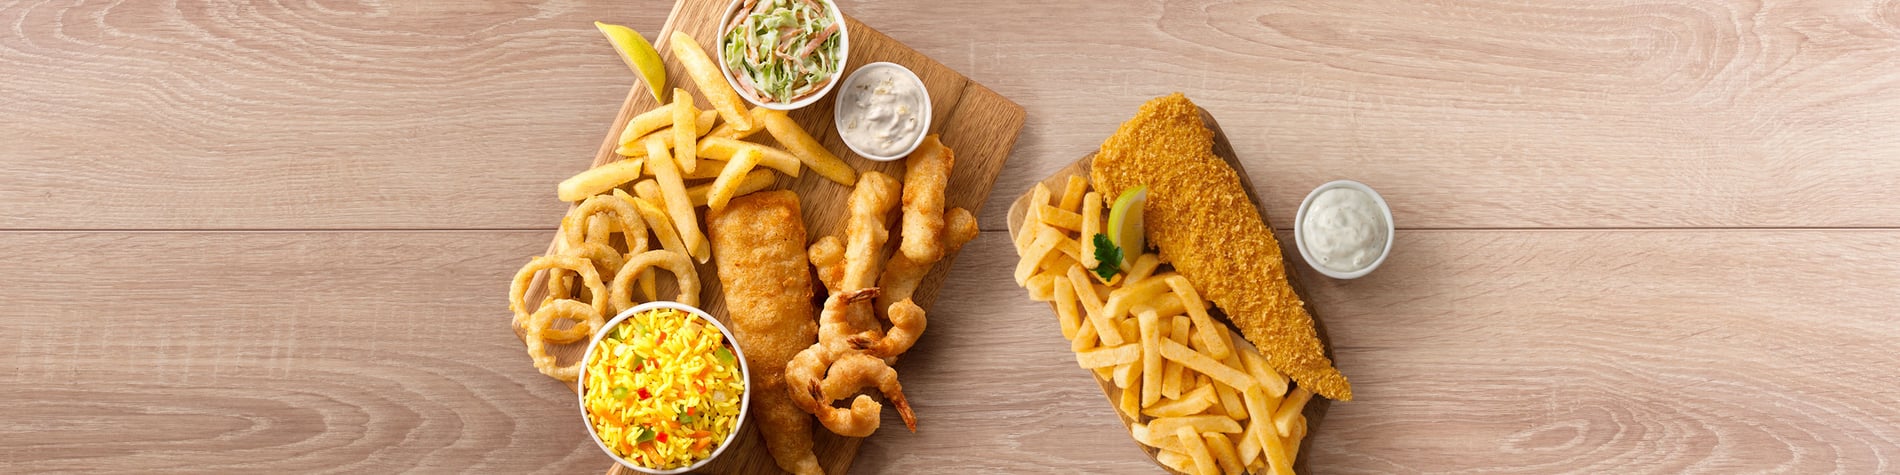 Seafood meals from Fishaways Blue Hills including a Crunchy Fish and Chips meal and a seafood Platter for One with hake, calamari, prawns, chips, onion rings, and coleslaw.